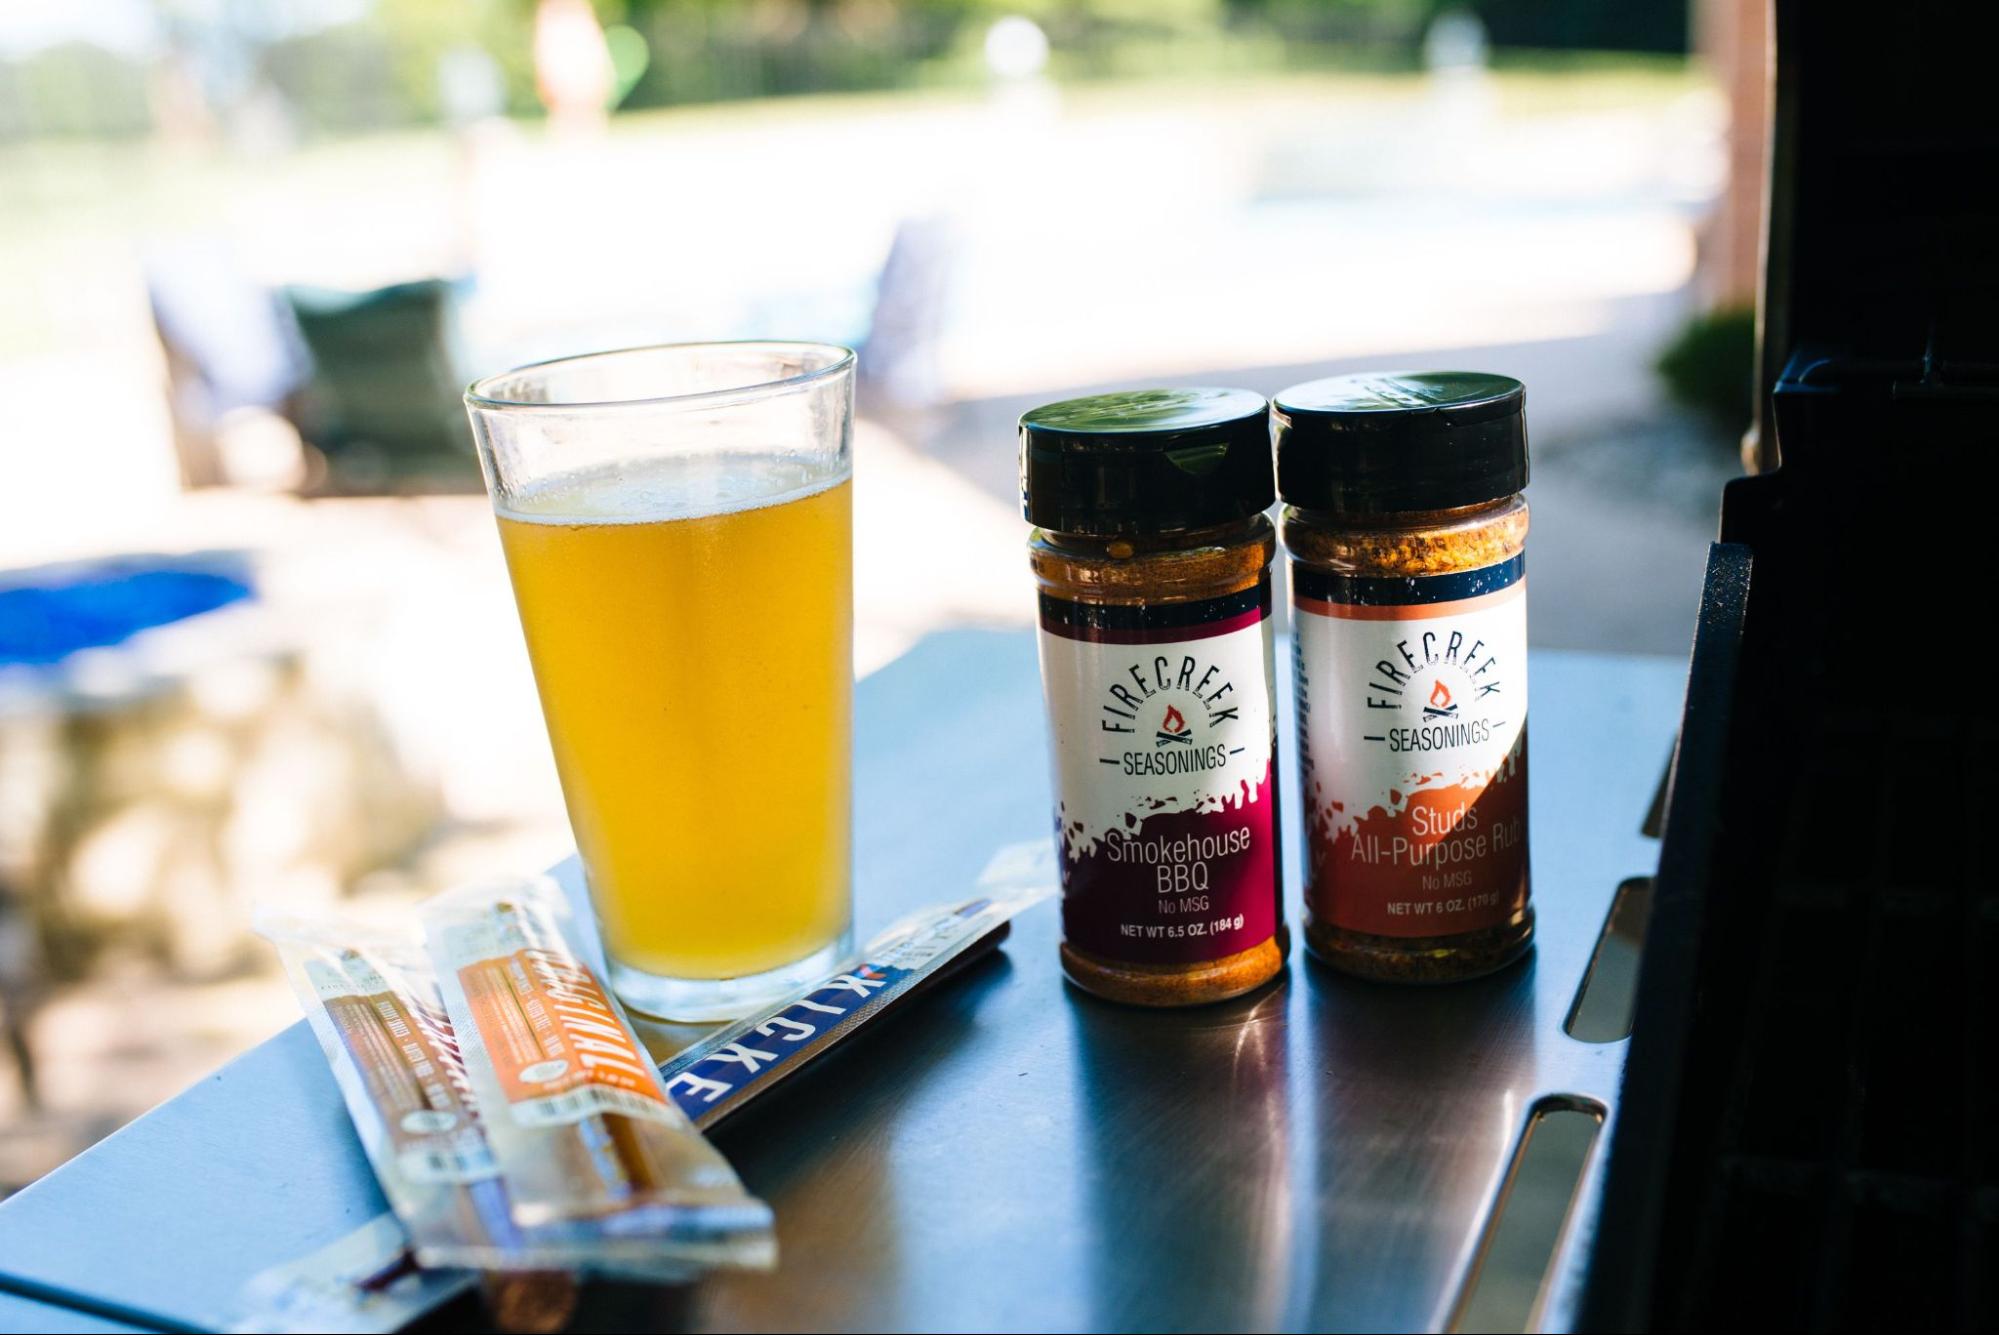 A duo of seasonings from FireCreek and some packs of jerky back dropped by a beverage.